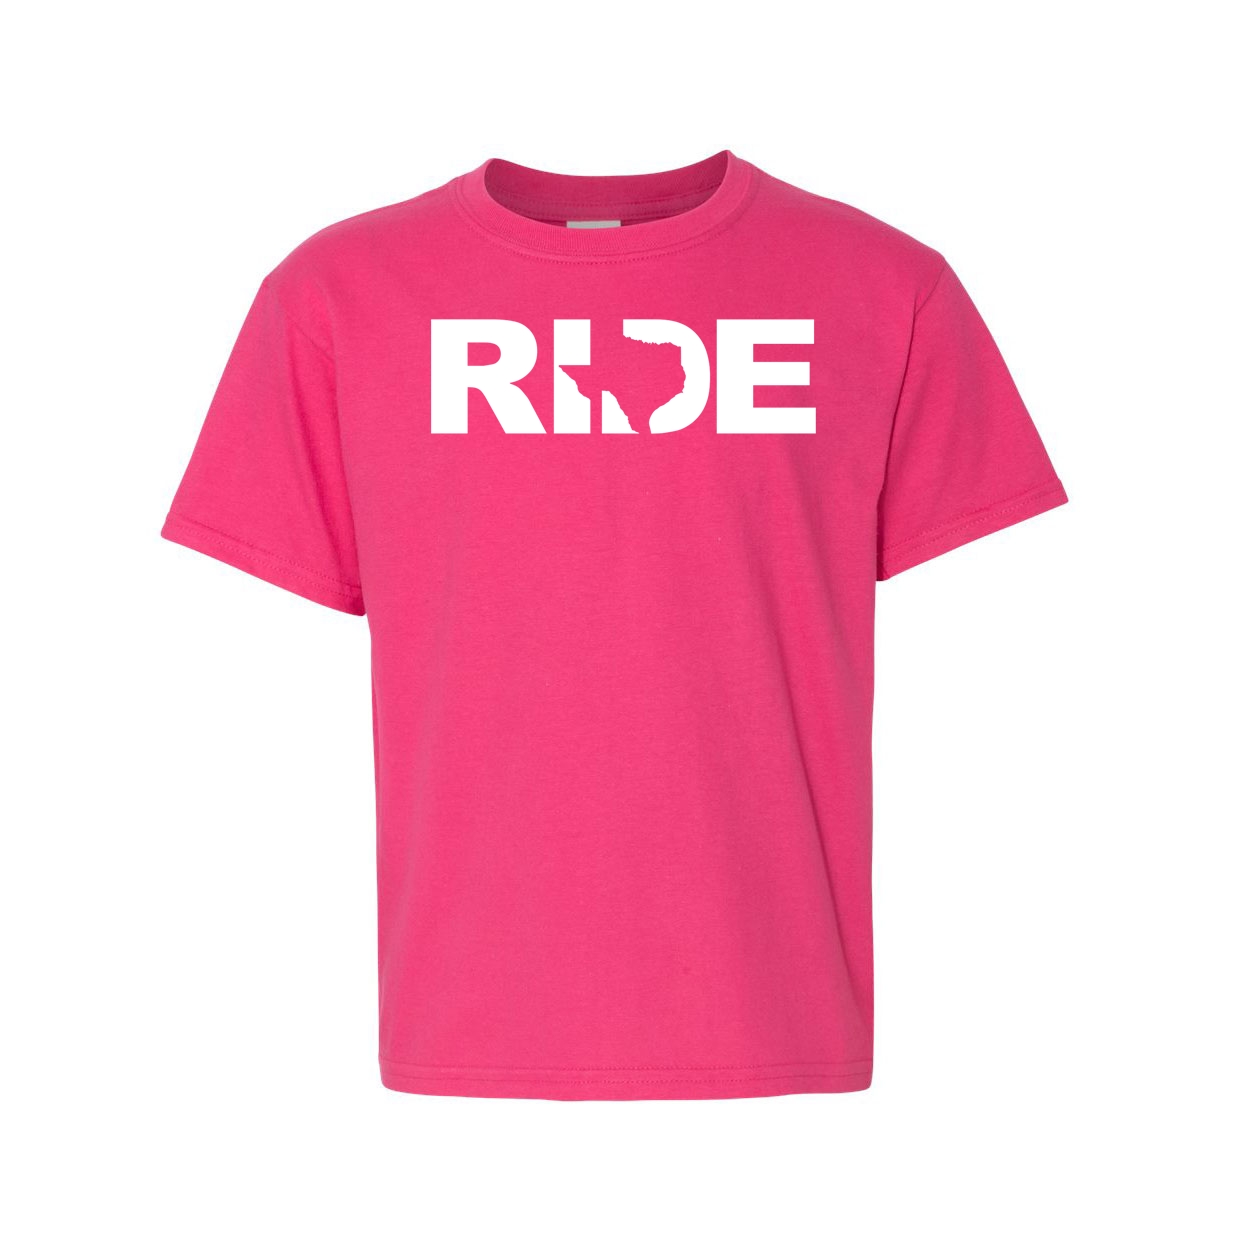 Ride Texas Classic Youth T-Shirt Pink (White Logo)